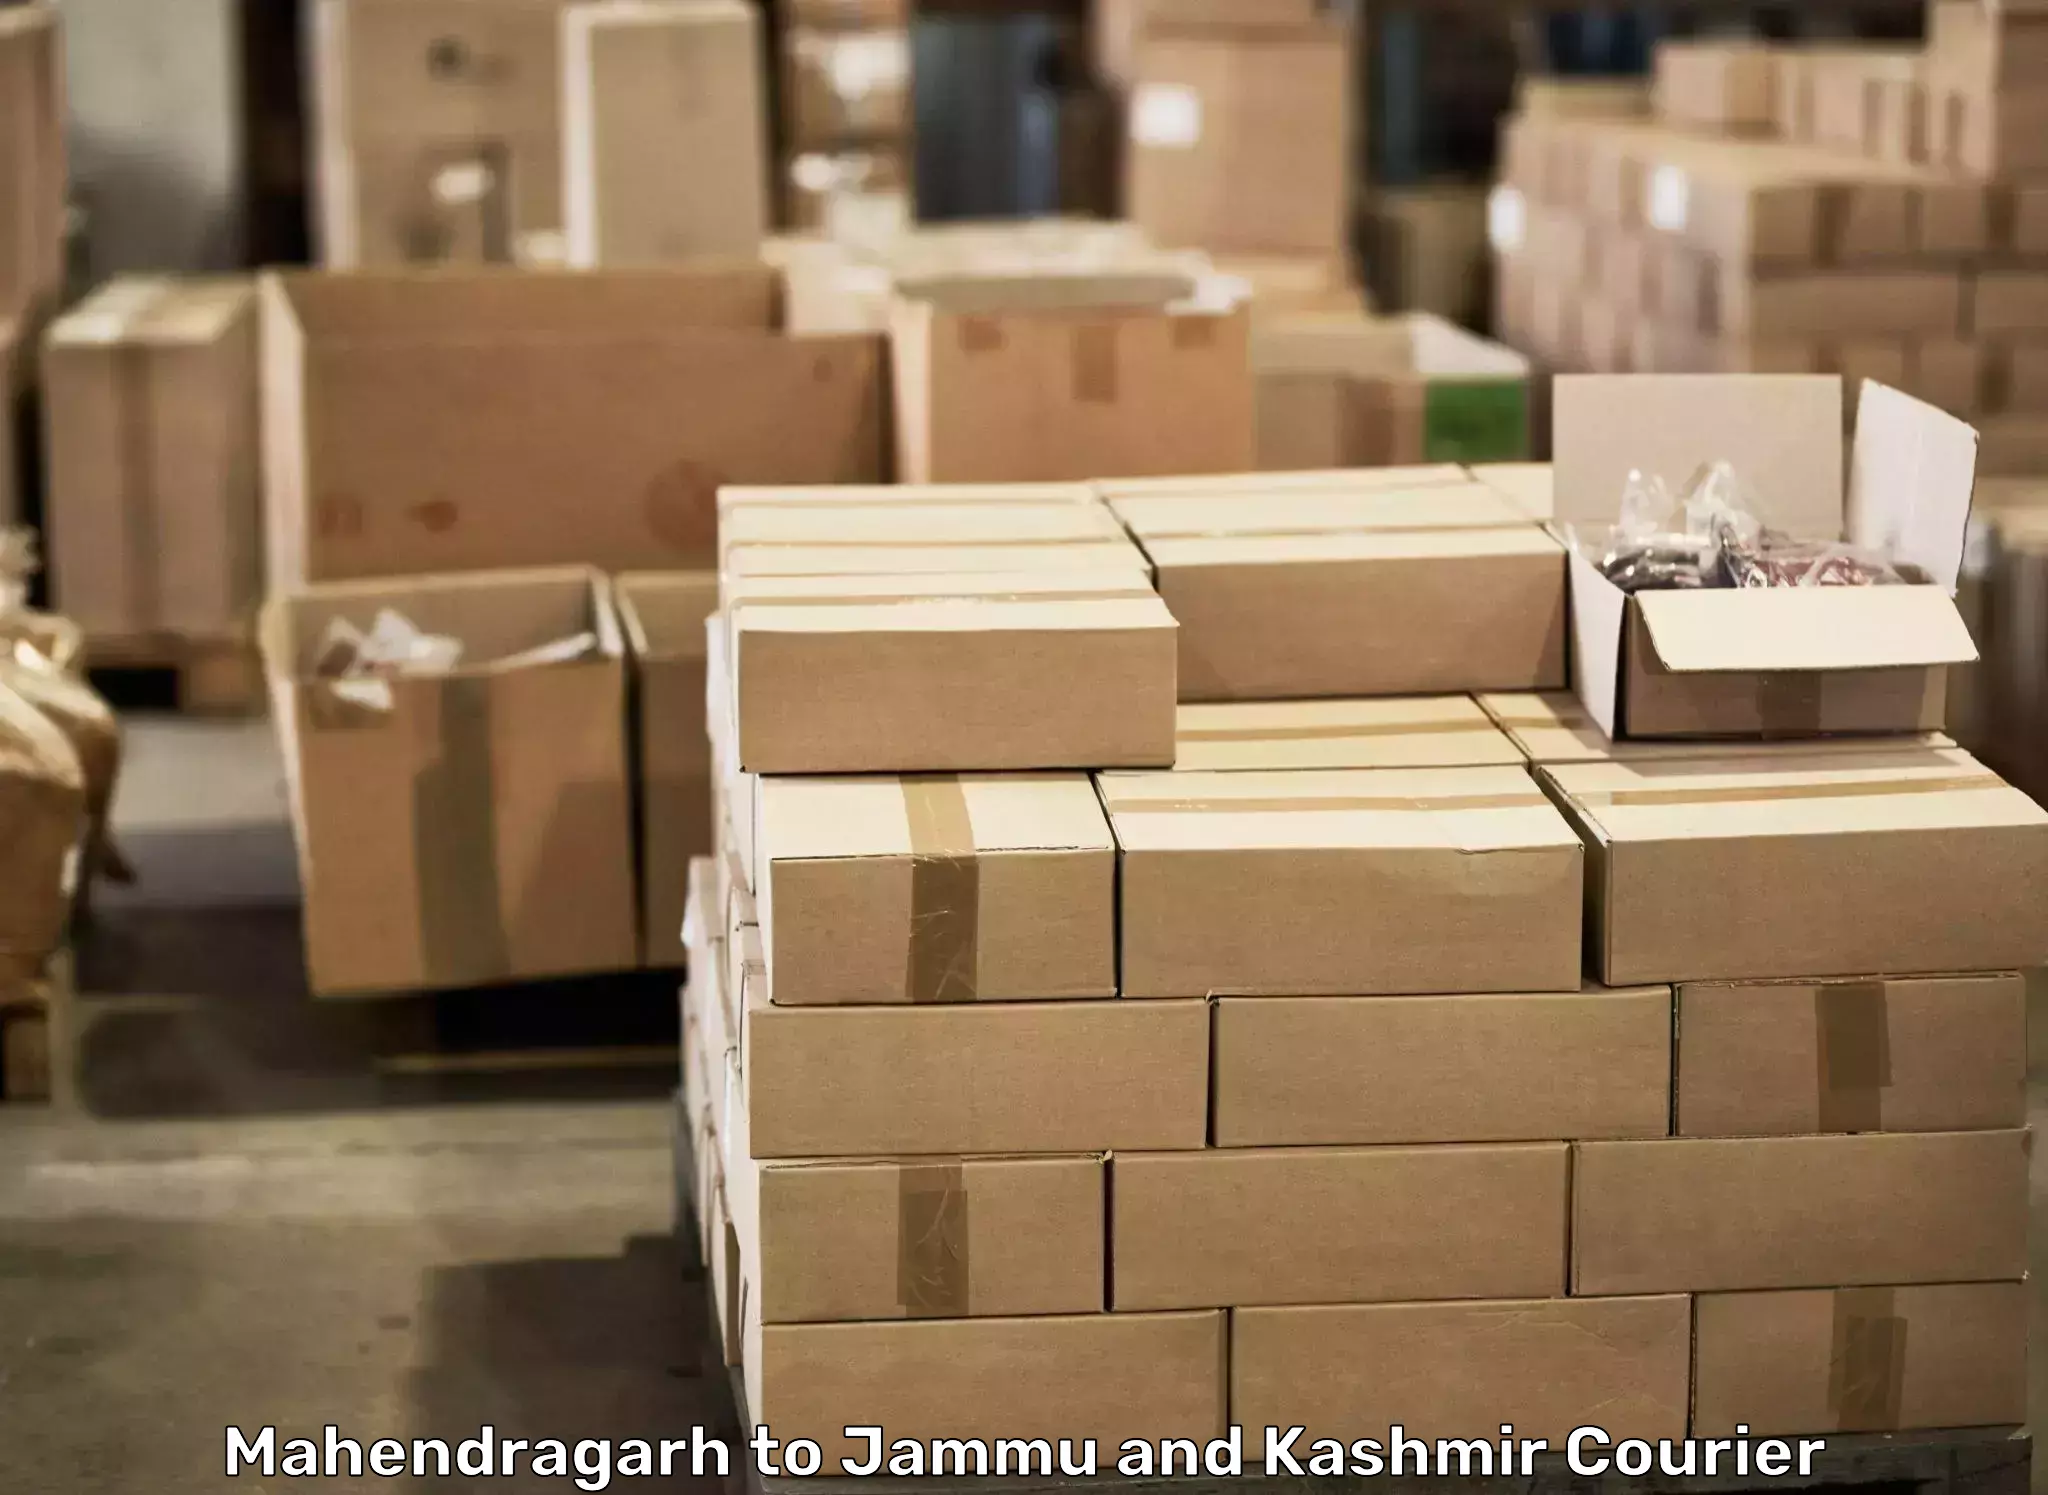 Professional moving assistance in Mahendragarh to Budgam